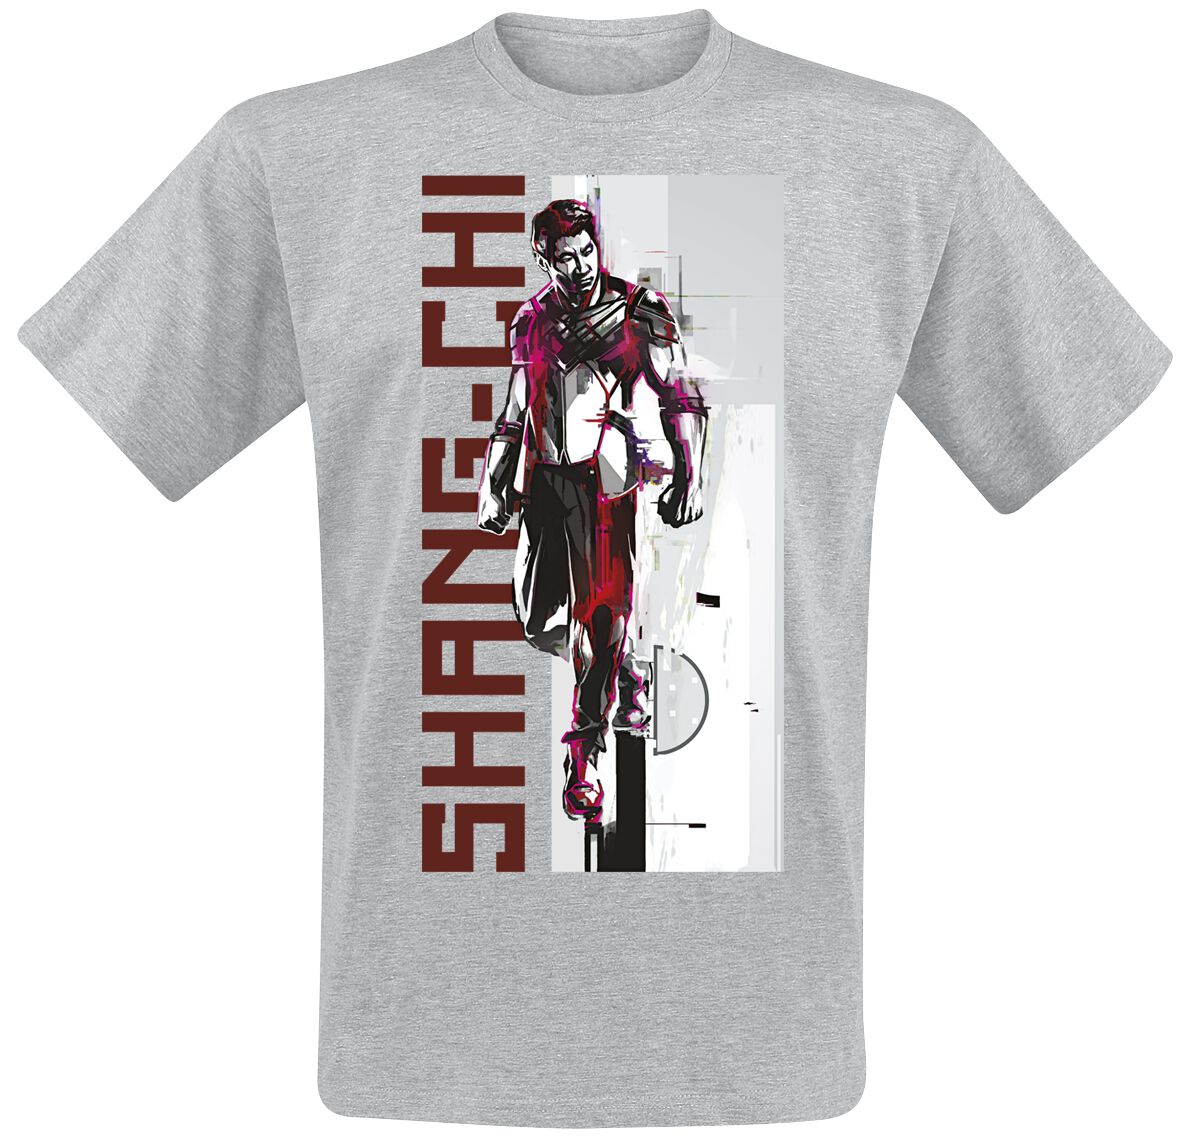 Shang-Chi and the Legend of the Ten Rings Shang-Chi T-Shirt mottled grey